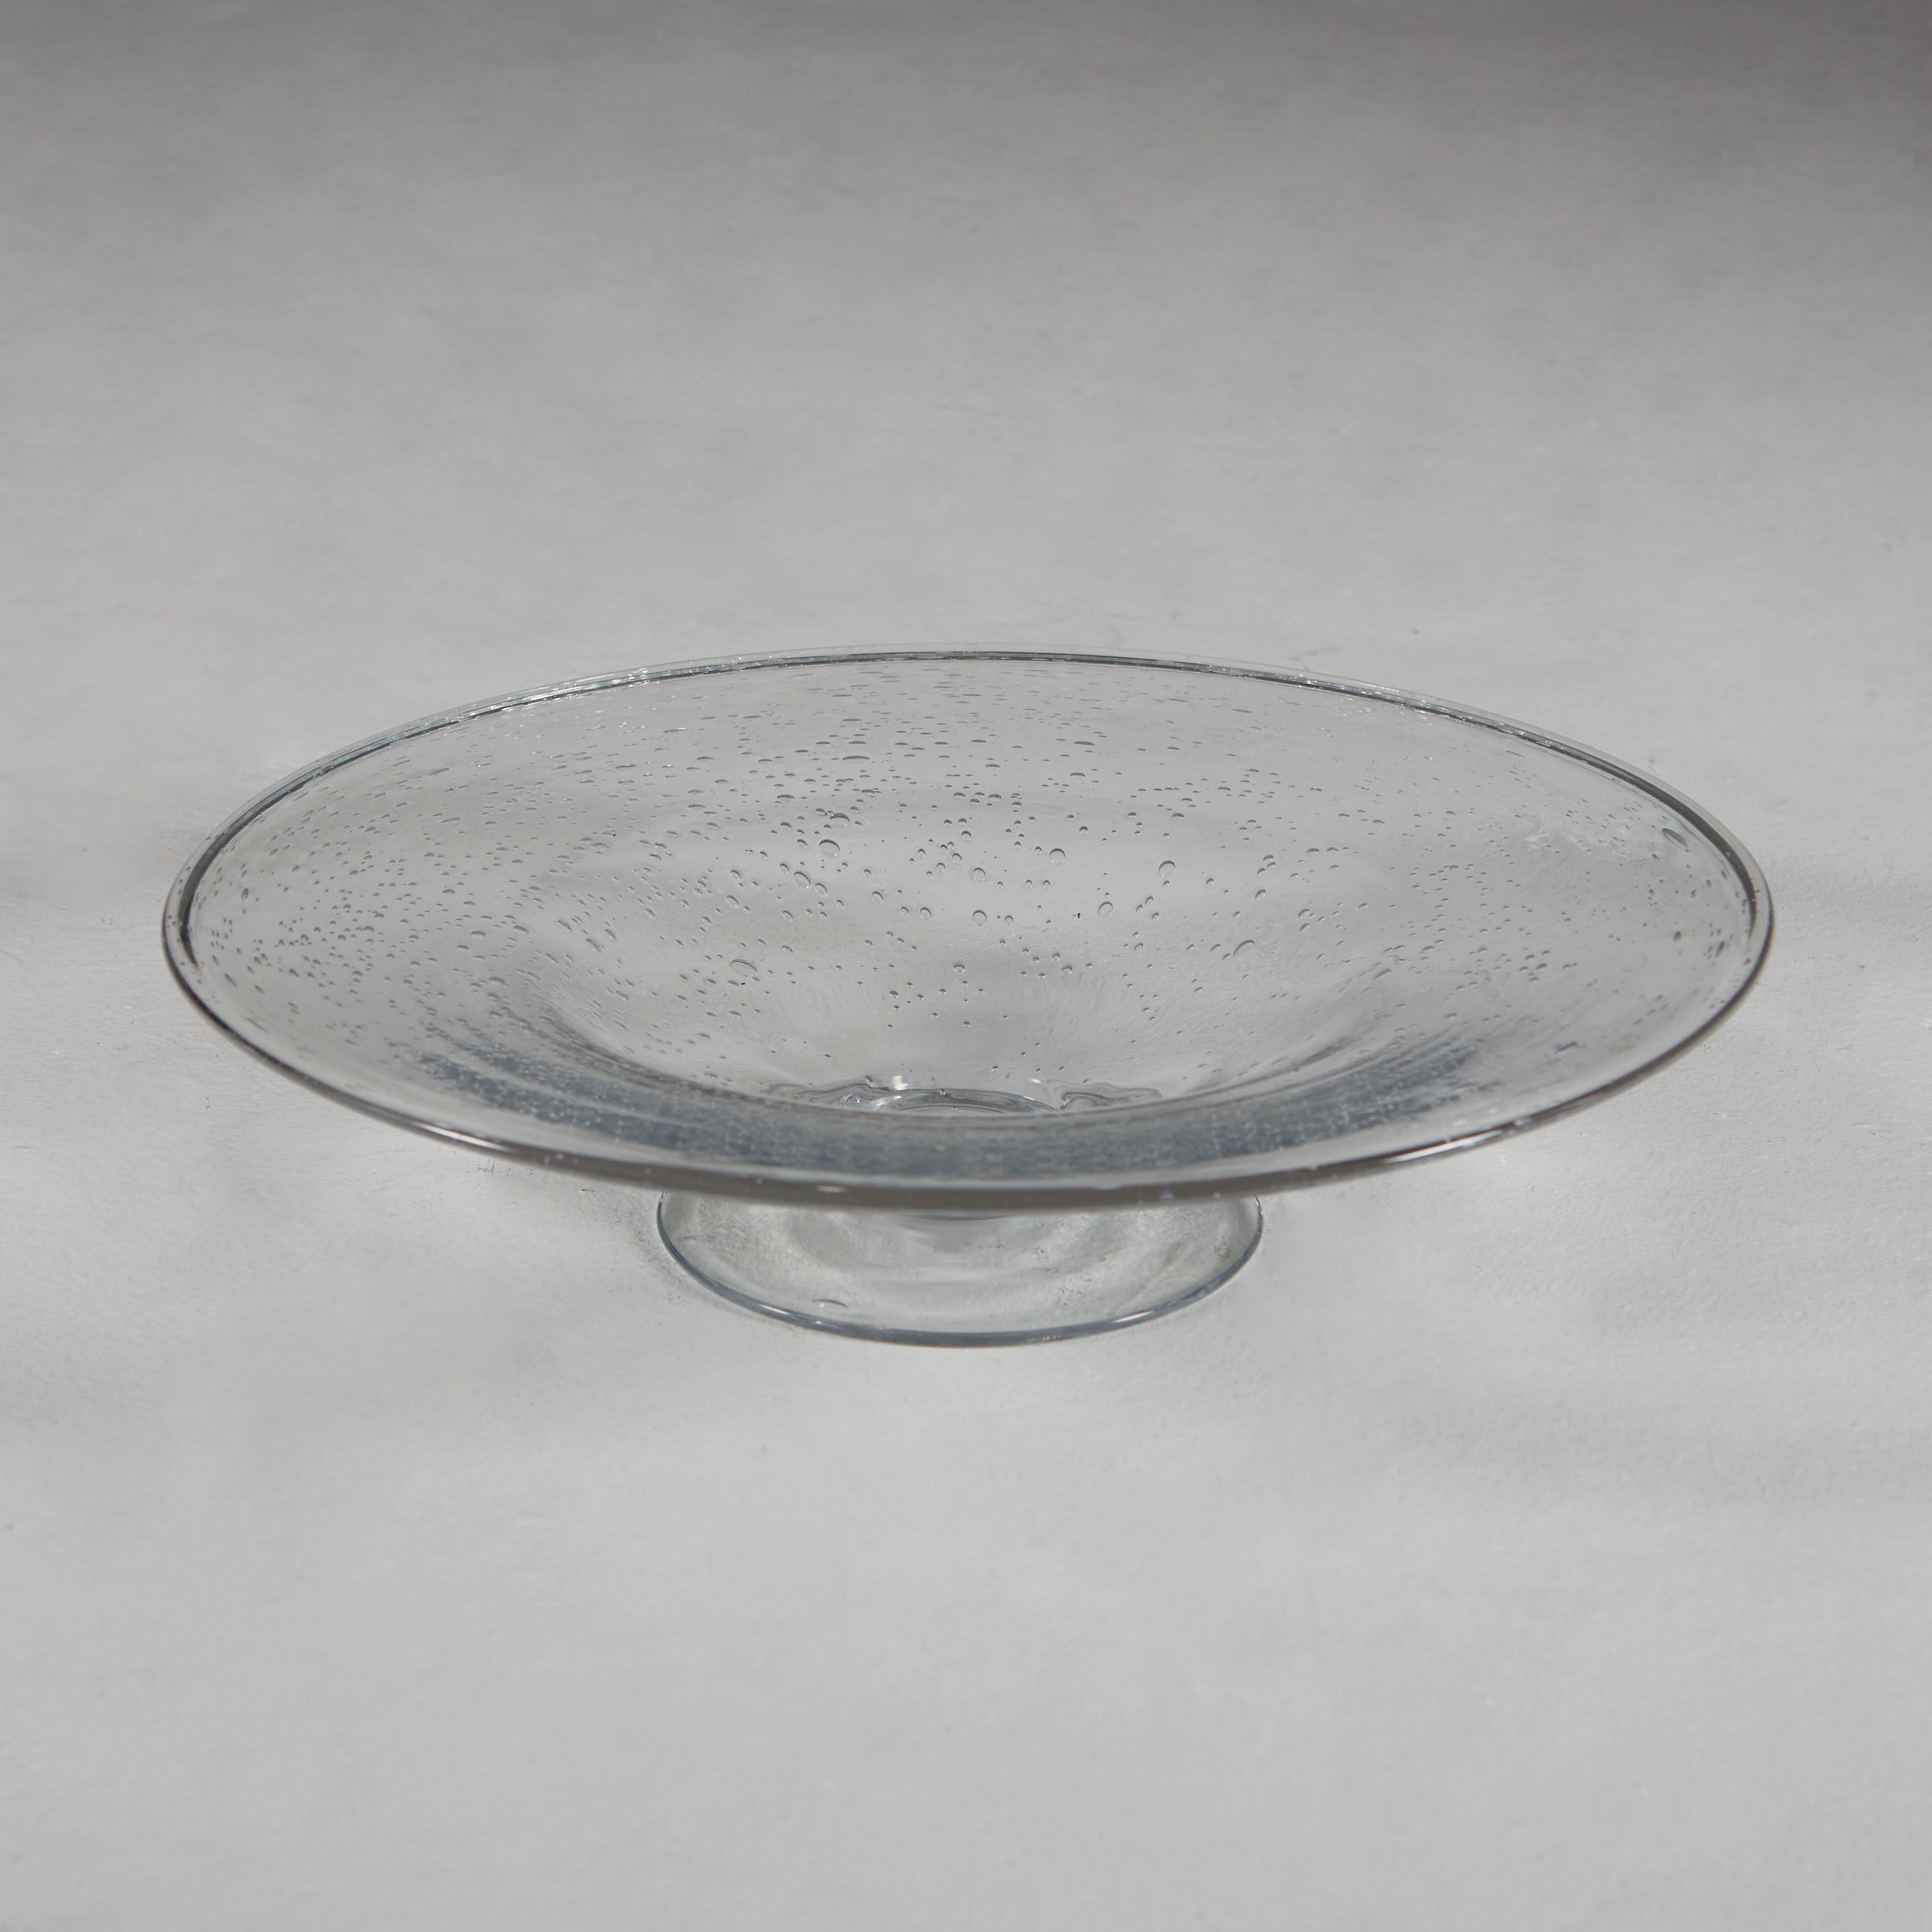 A mid-20th century clear Murano glass dish with stand, the Pulegoso technique used to create tiny air bubbles throughout.

Carved wooden fruits not included.